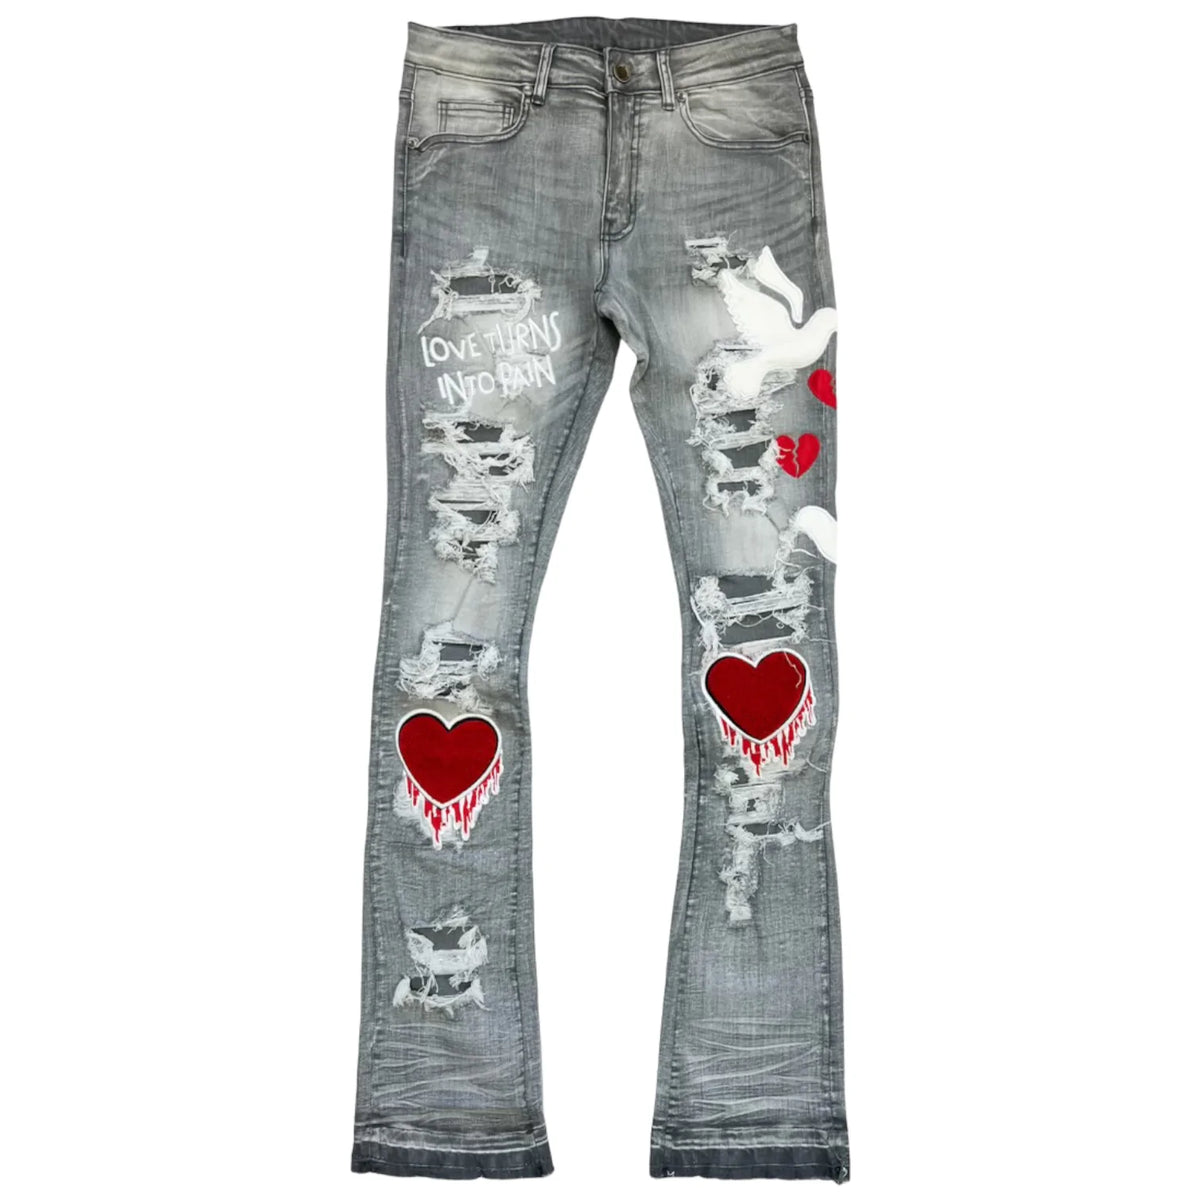 Focus - Peace And Love Stacked Jeans - Grey